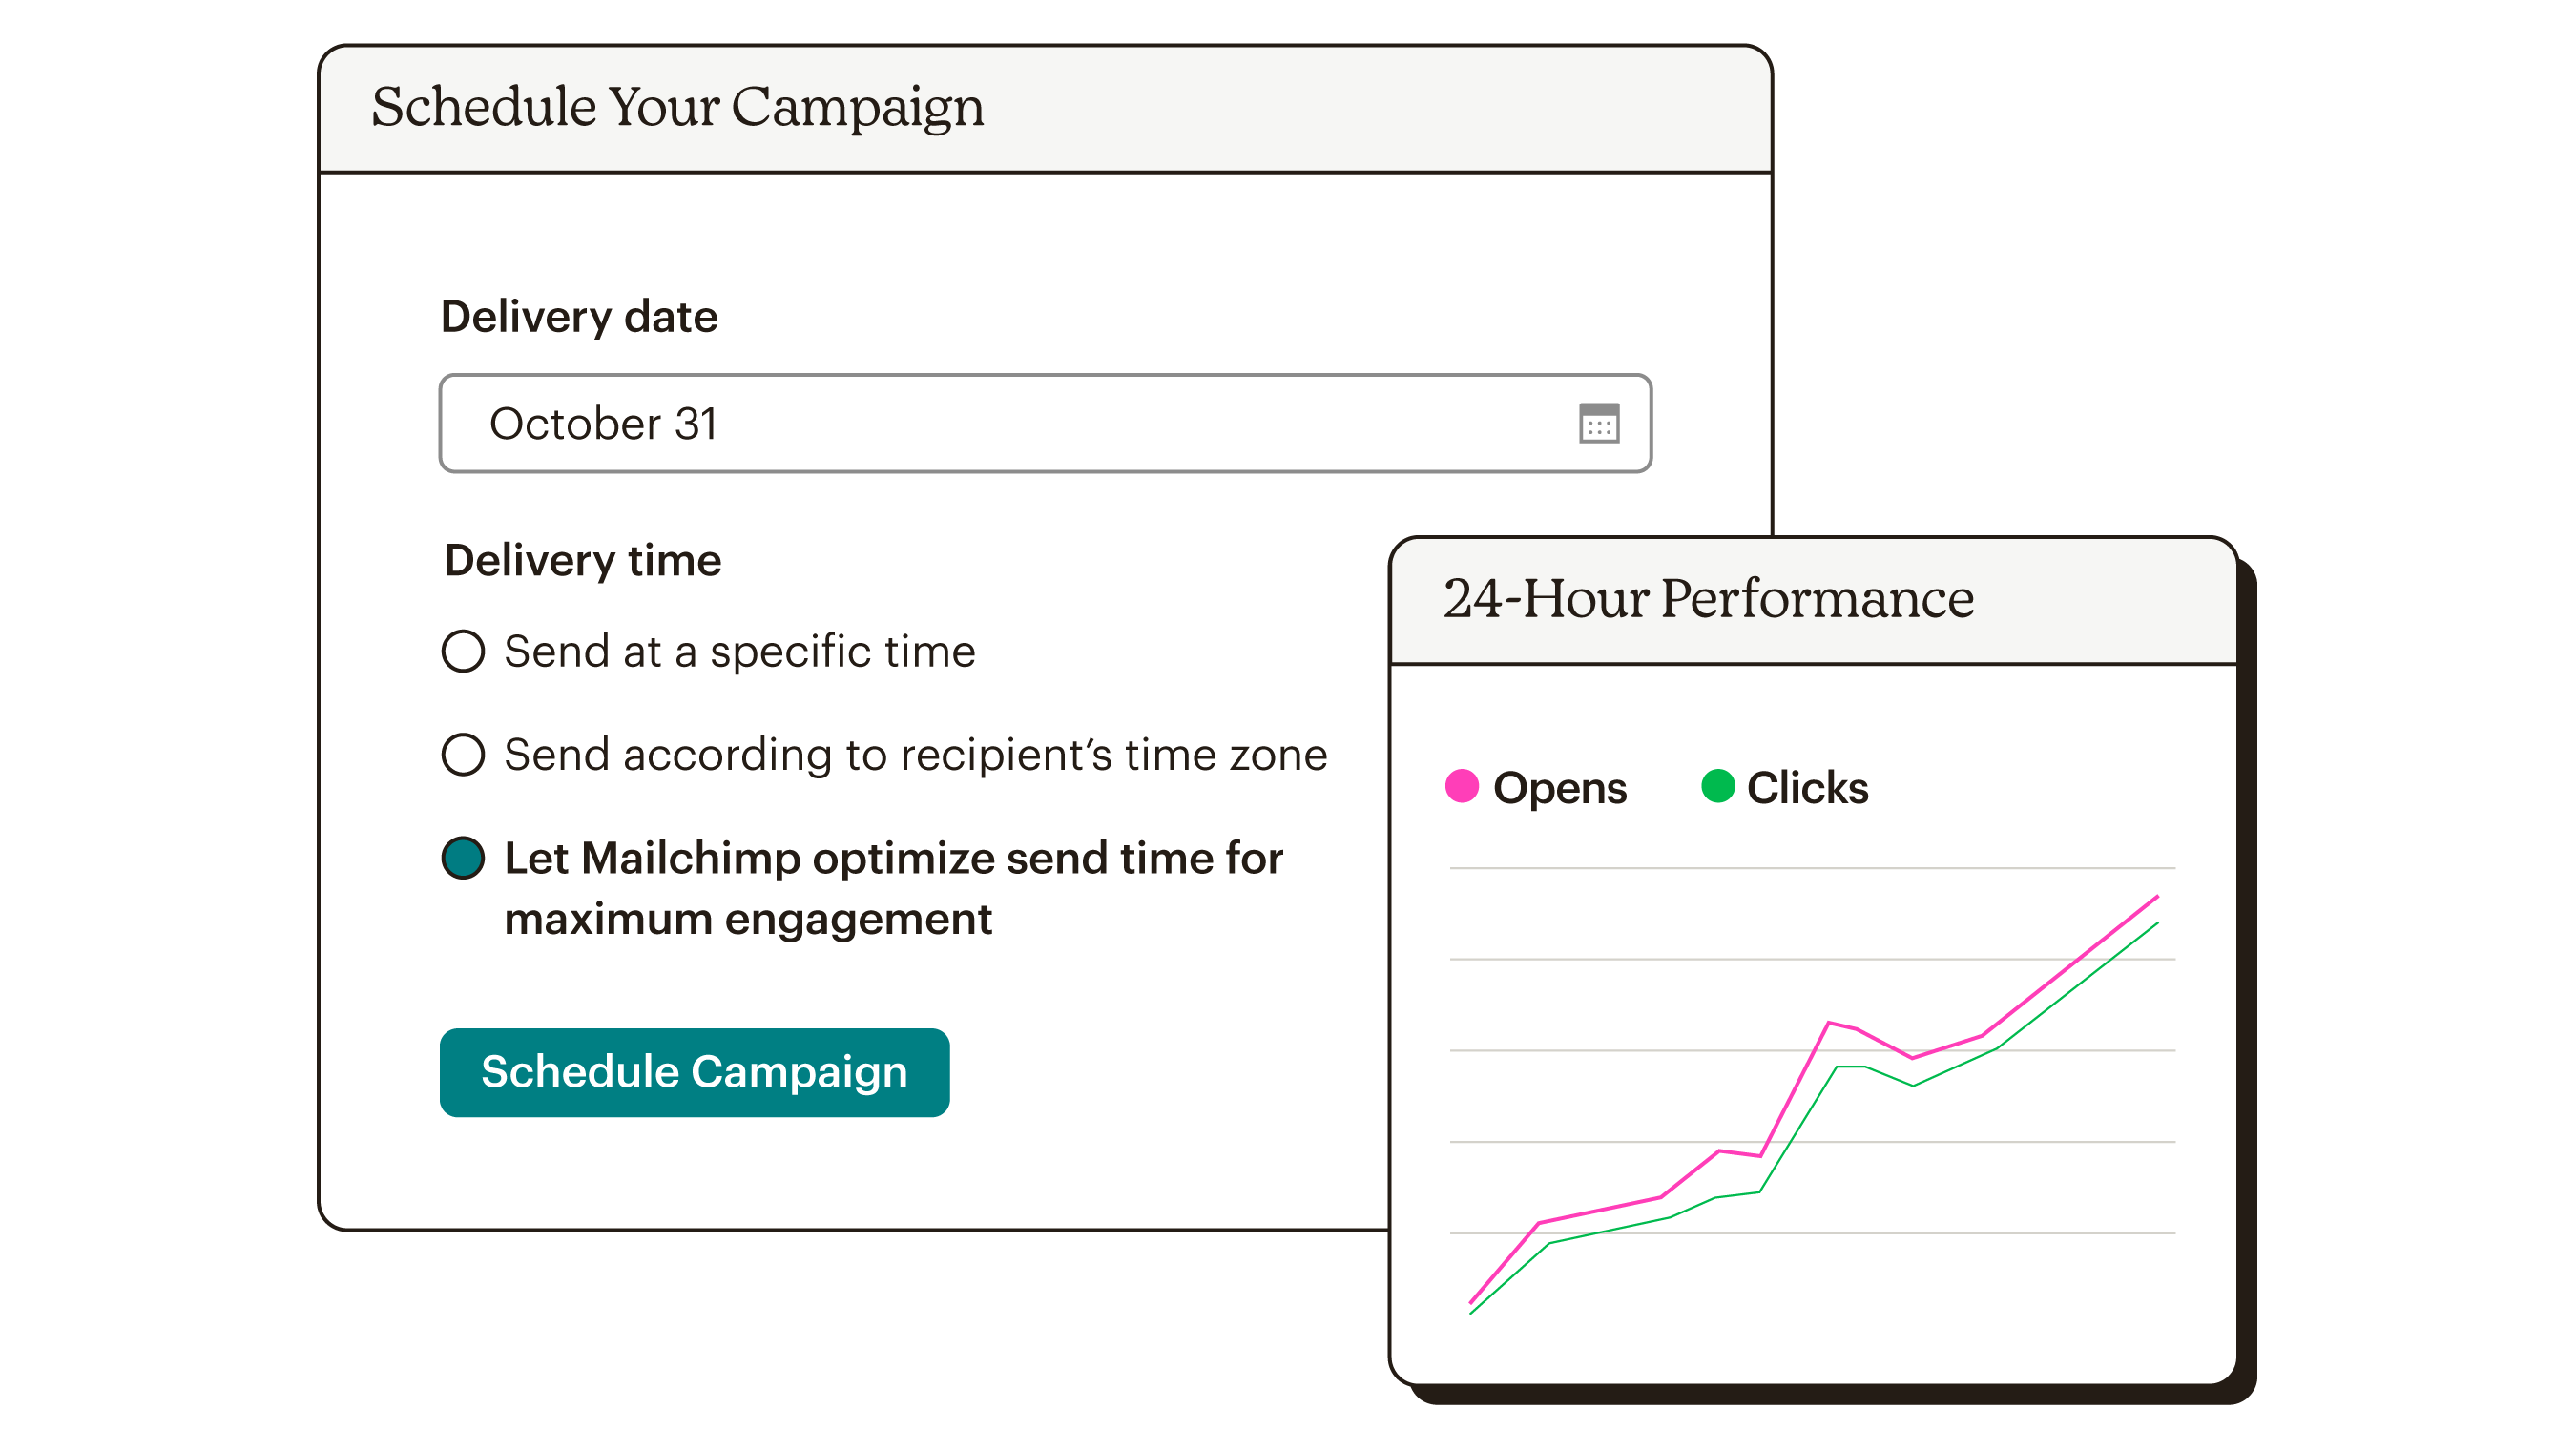 Send time optimization abstract UI with 24-hour performance results.